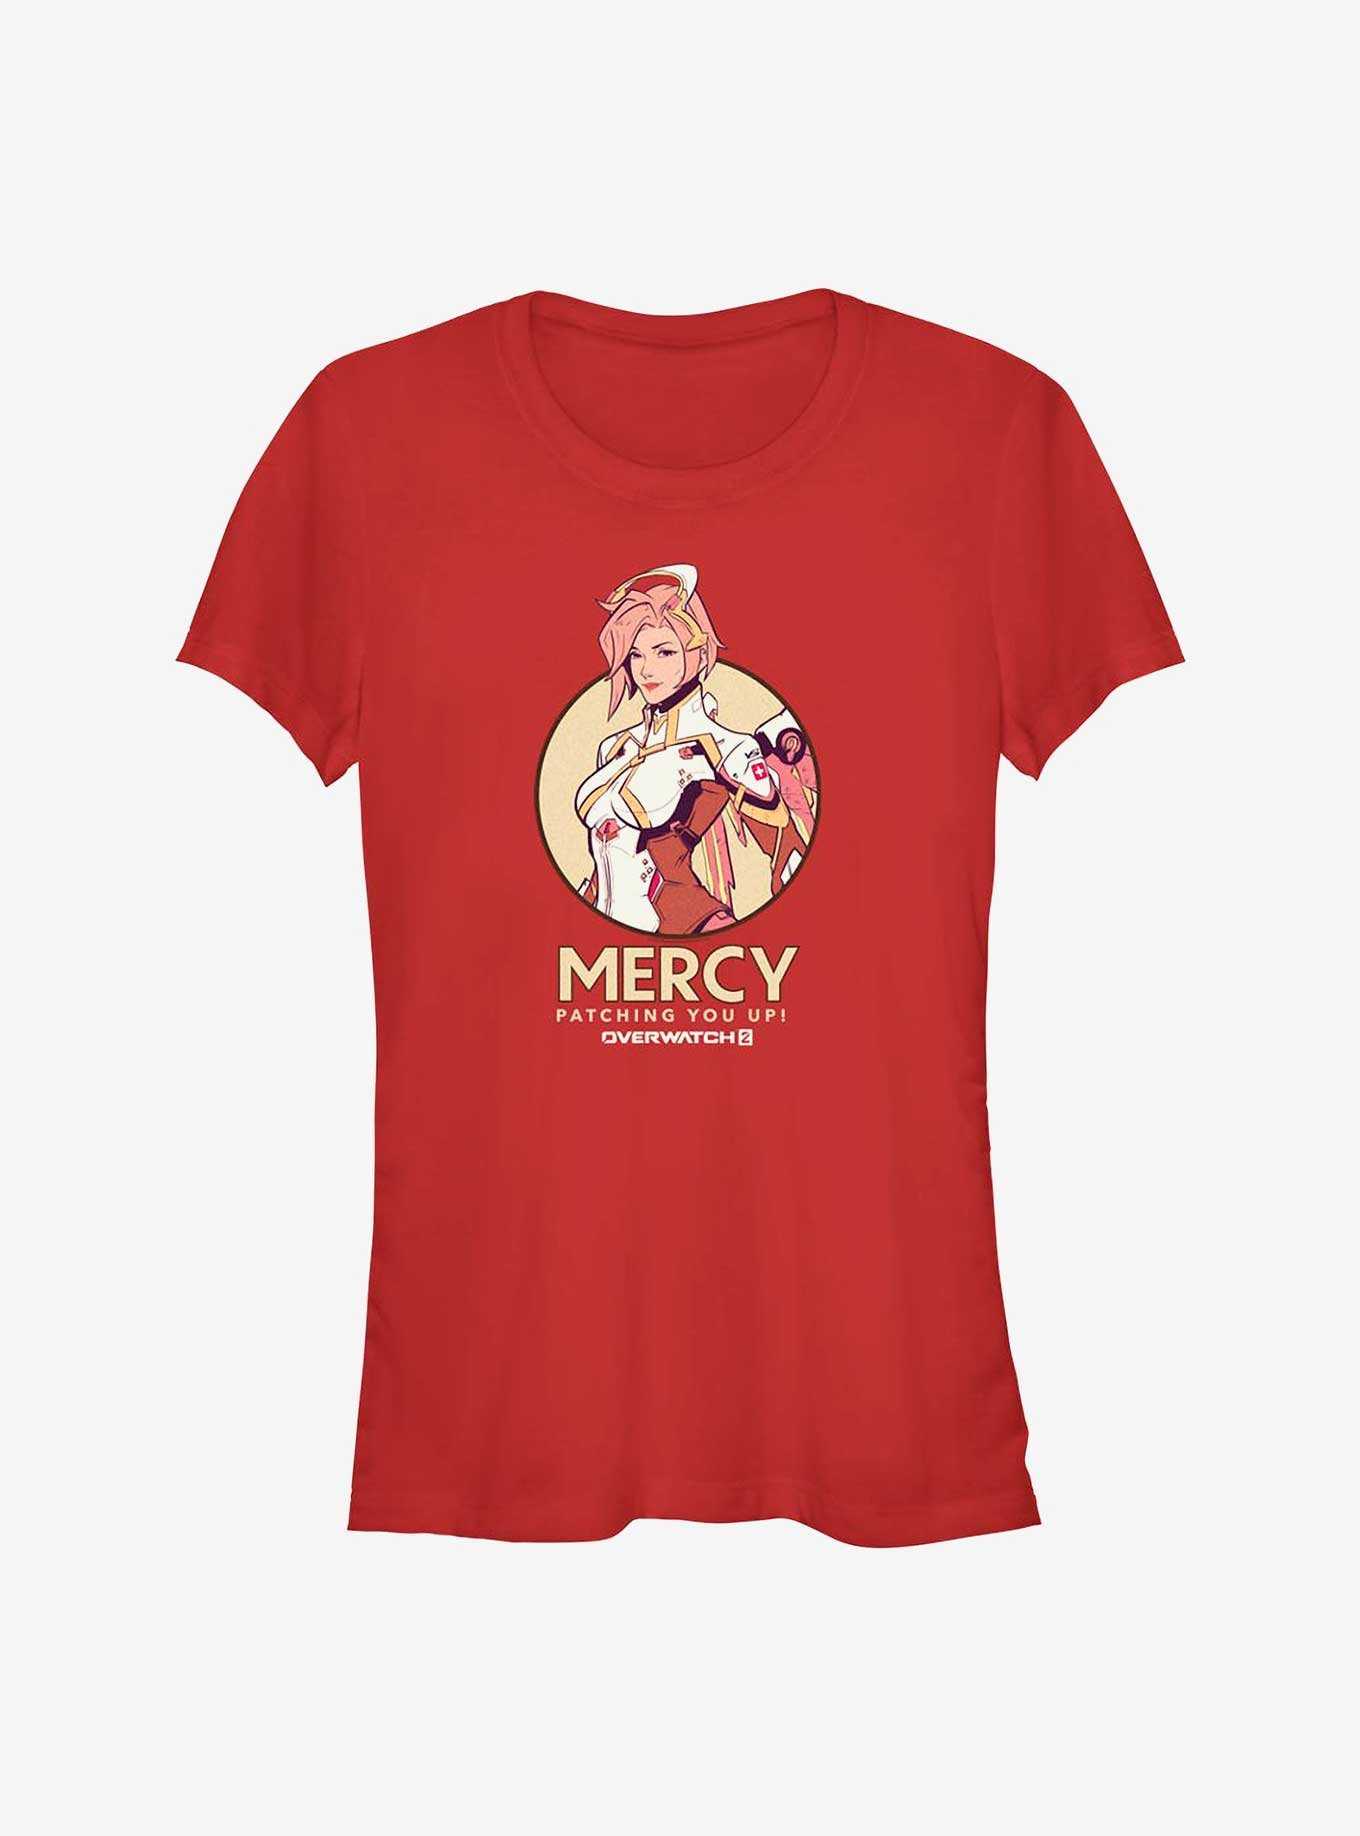 Overwatch 2 Mercy Patching You Up Girls T-Shirt, , hi-res